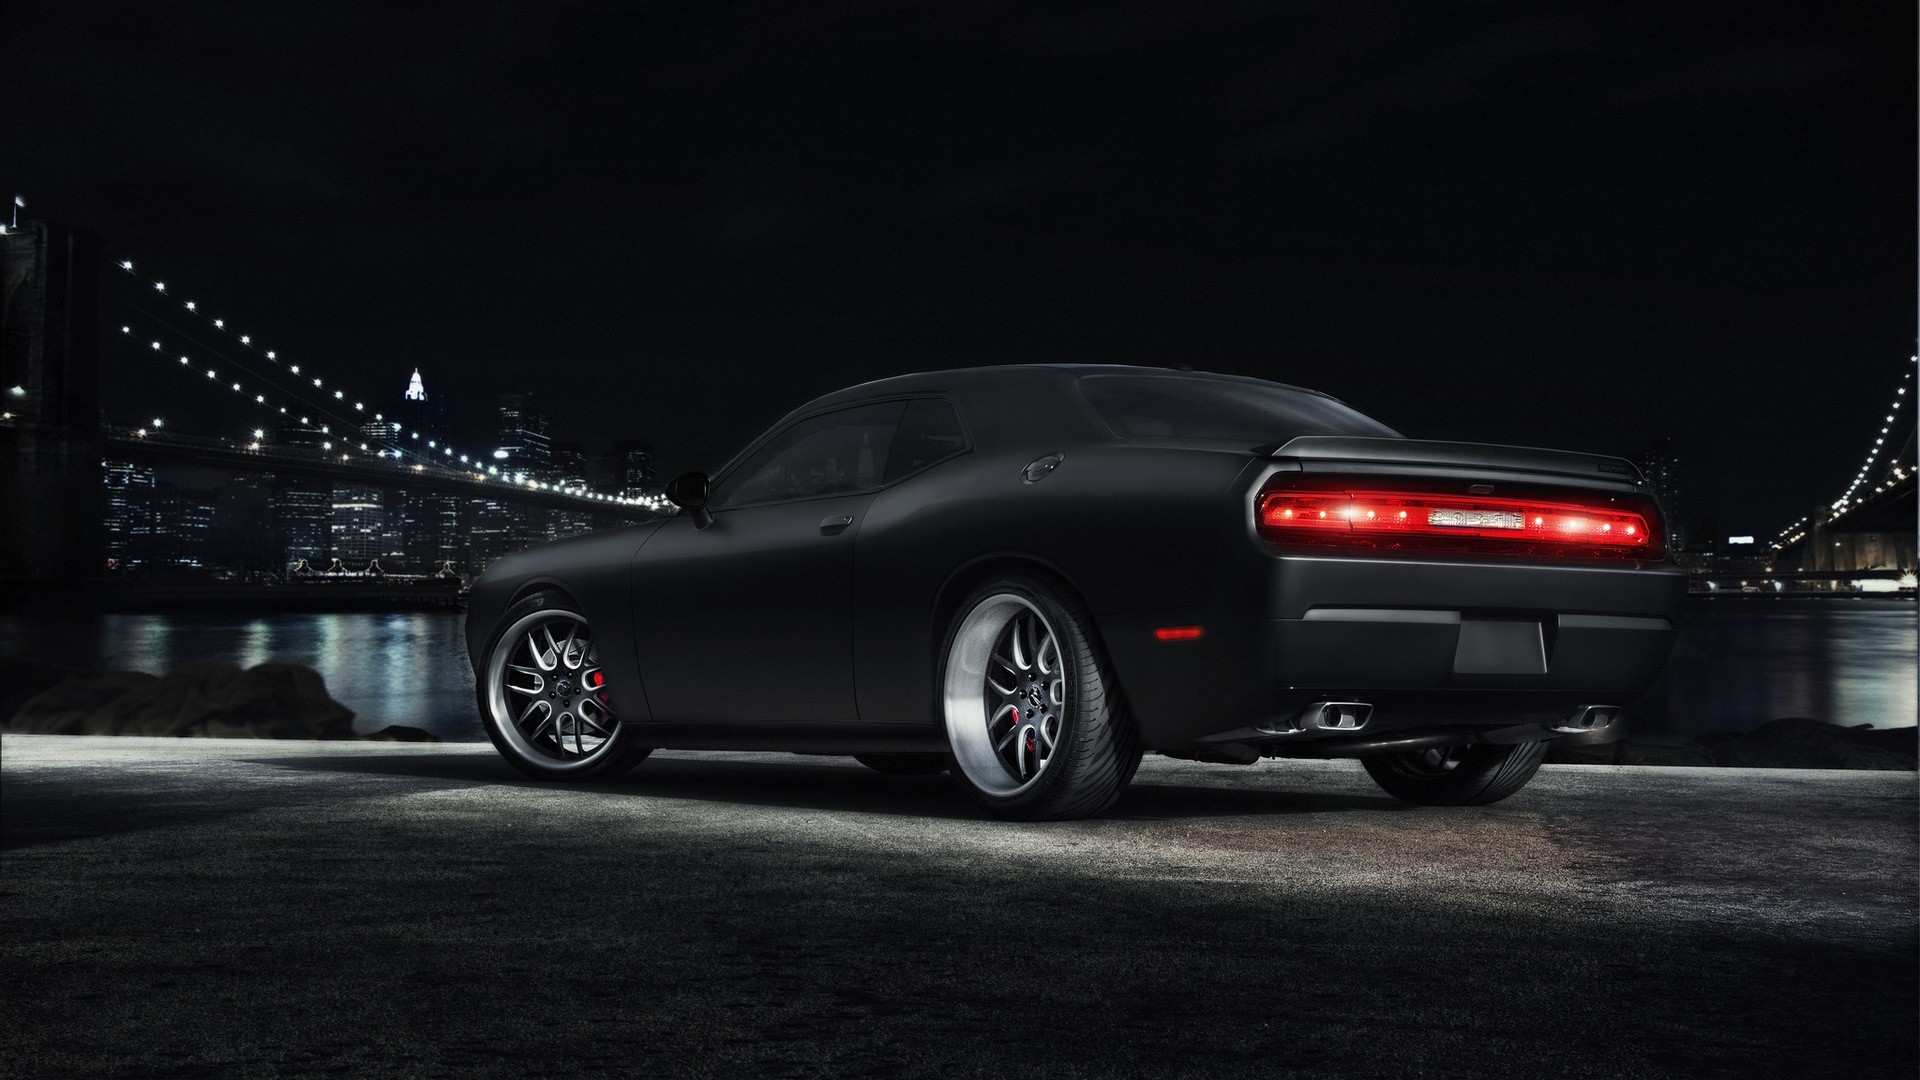 Muscle Cars Wallpapers High Resolution (48+ images) Muscle Car Wallpaper 1920x1080